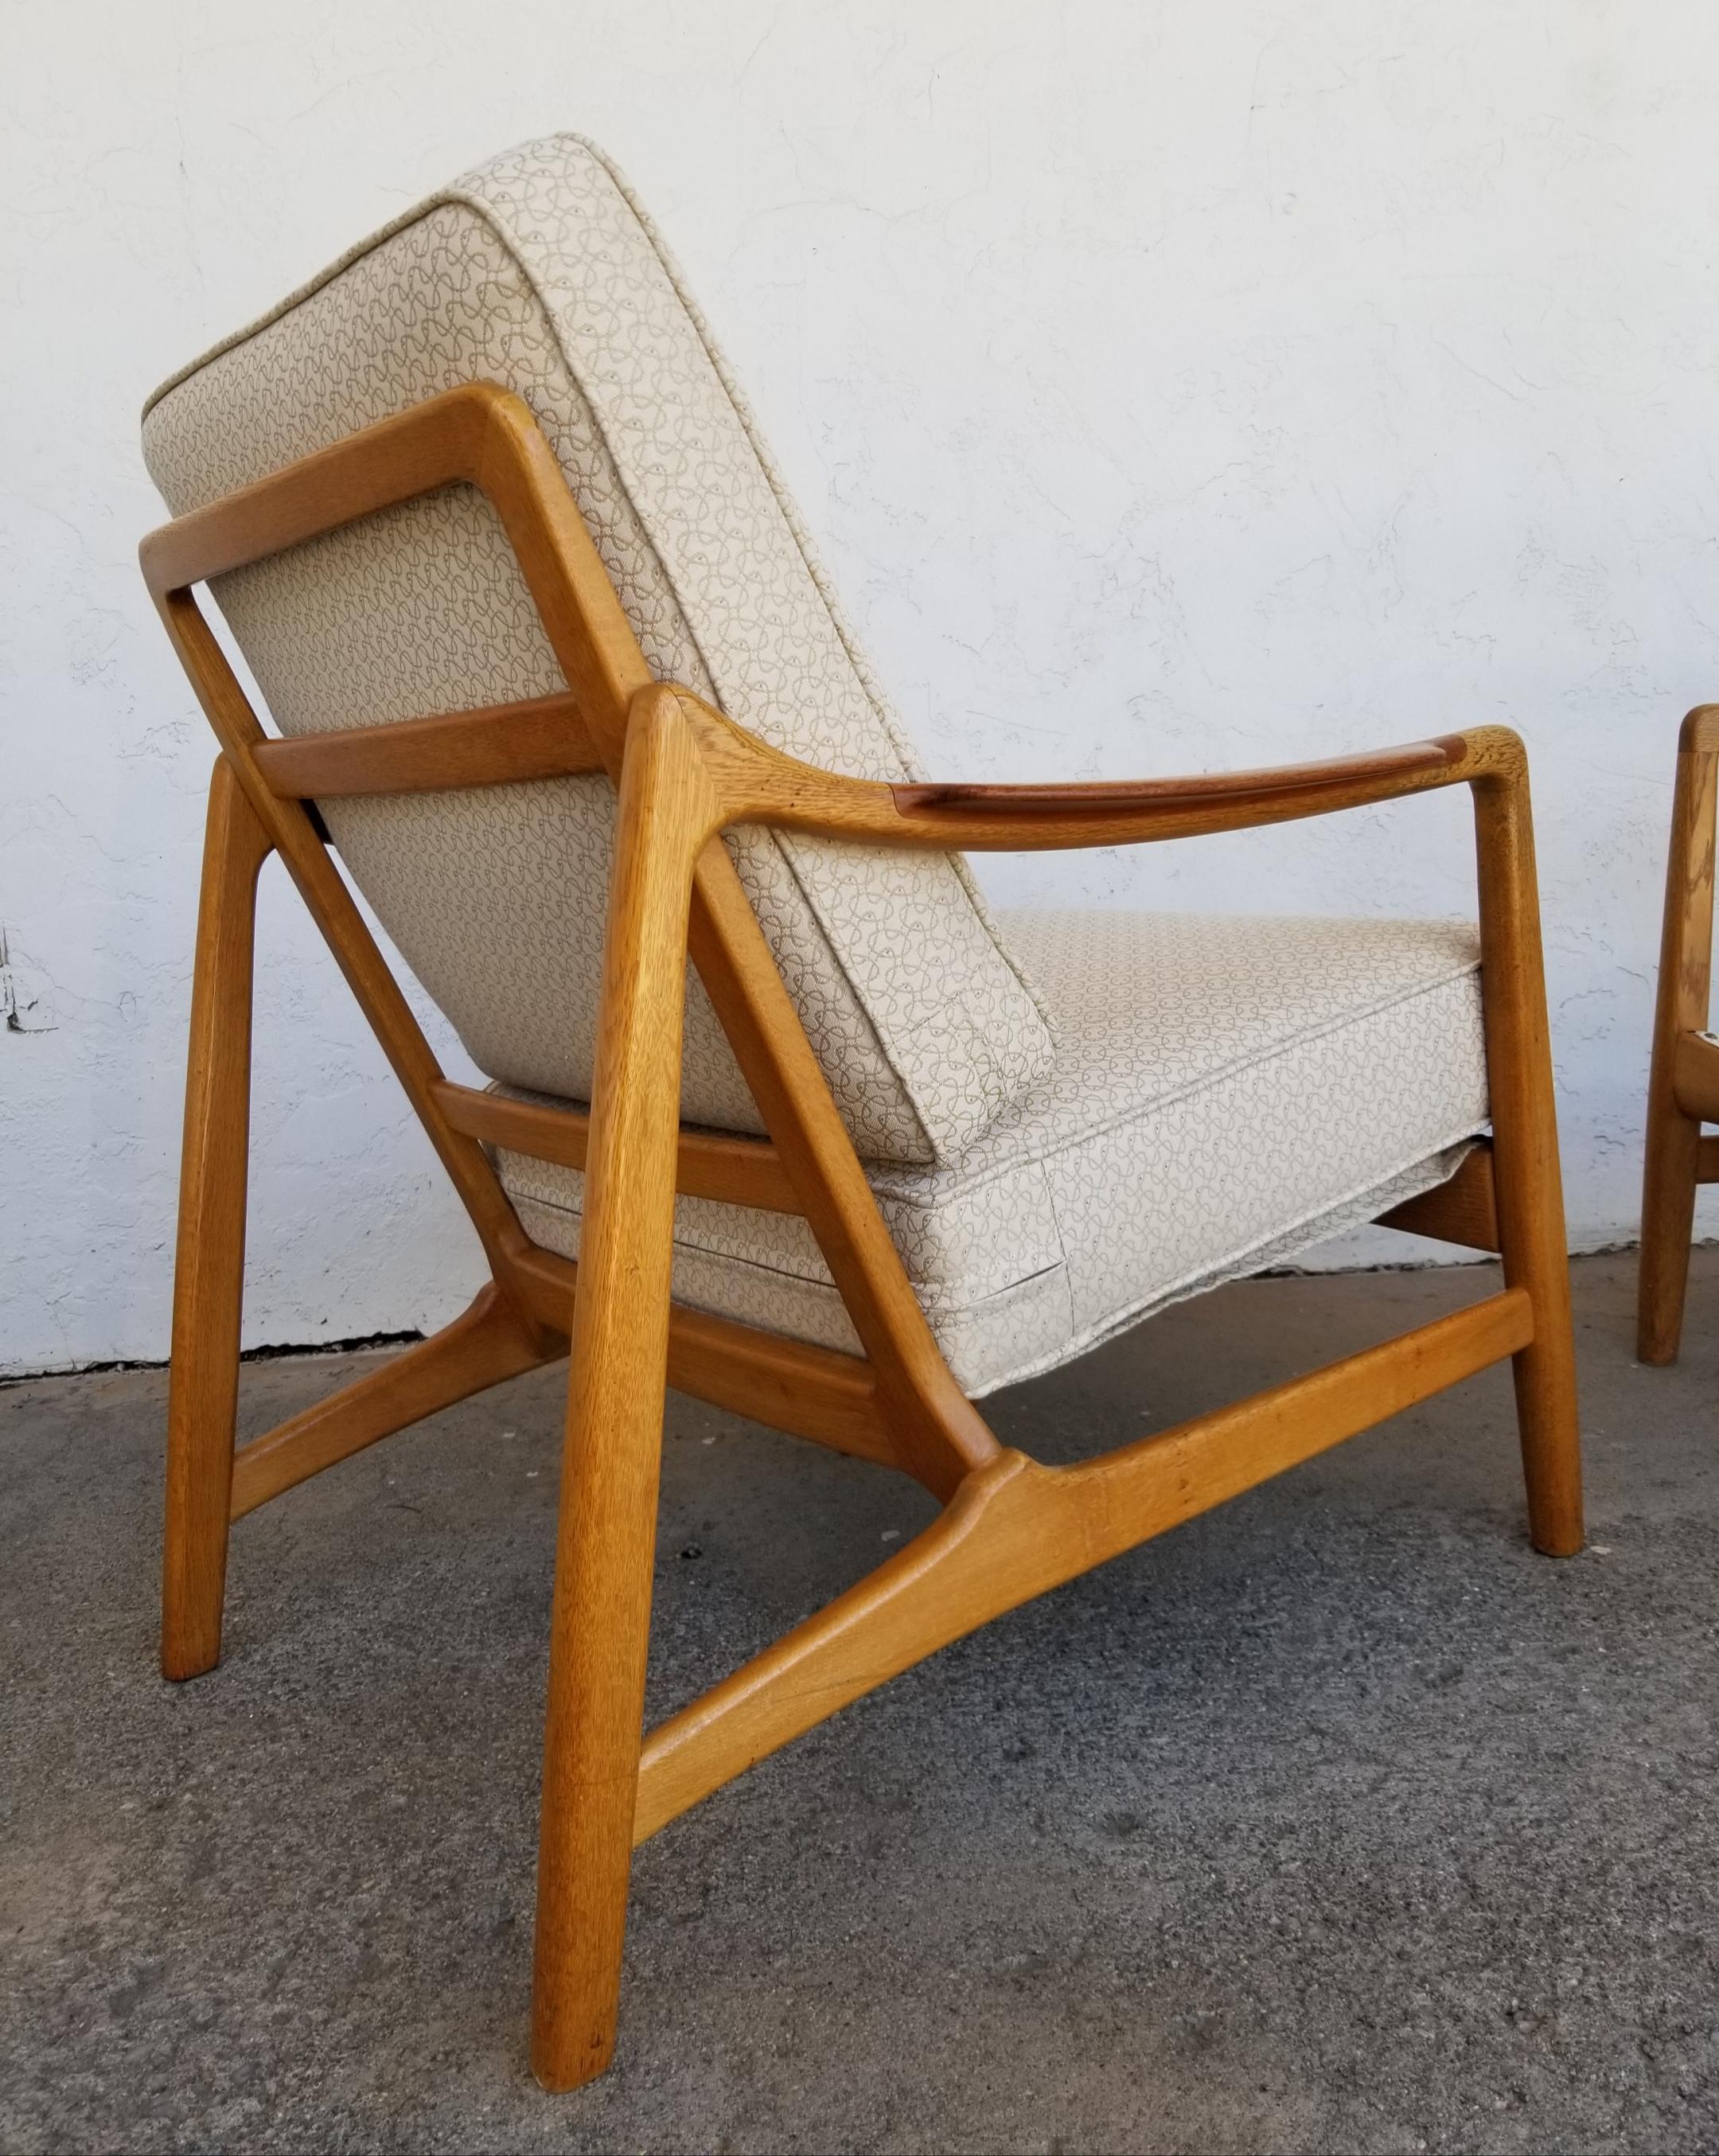 A fine pair of Danish modern lounge chairs made of teak & oak. Designed by Tove & Edvard Kindt-Larsen for France & Daverkosen. Denmark, Circa. 1960. Beautiful original finish with depth and glow to patina. Older re-upholstery is in excellent